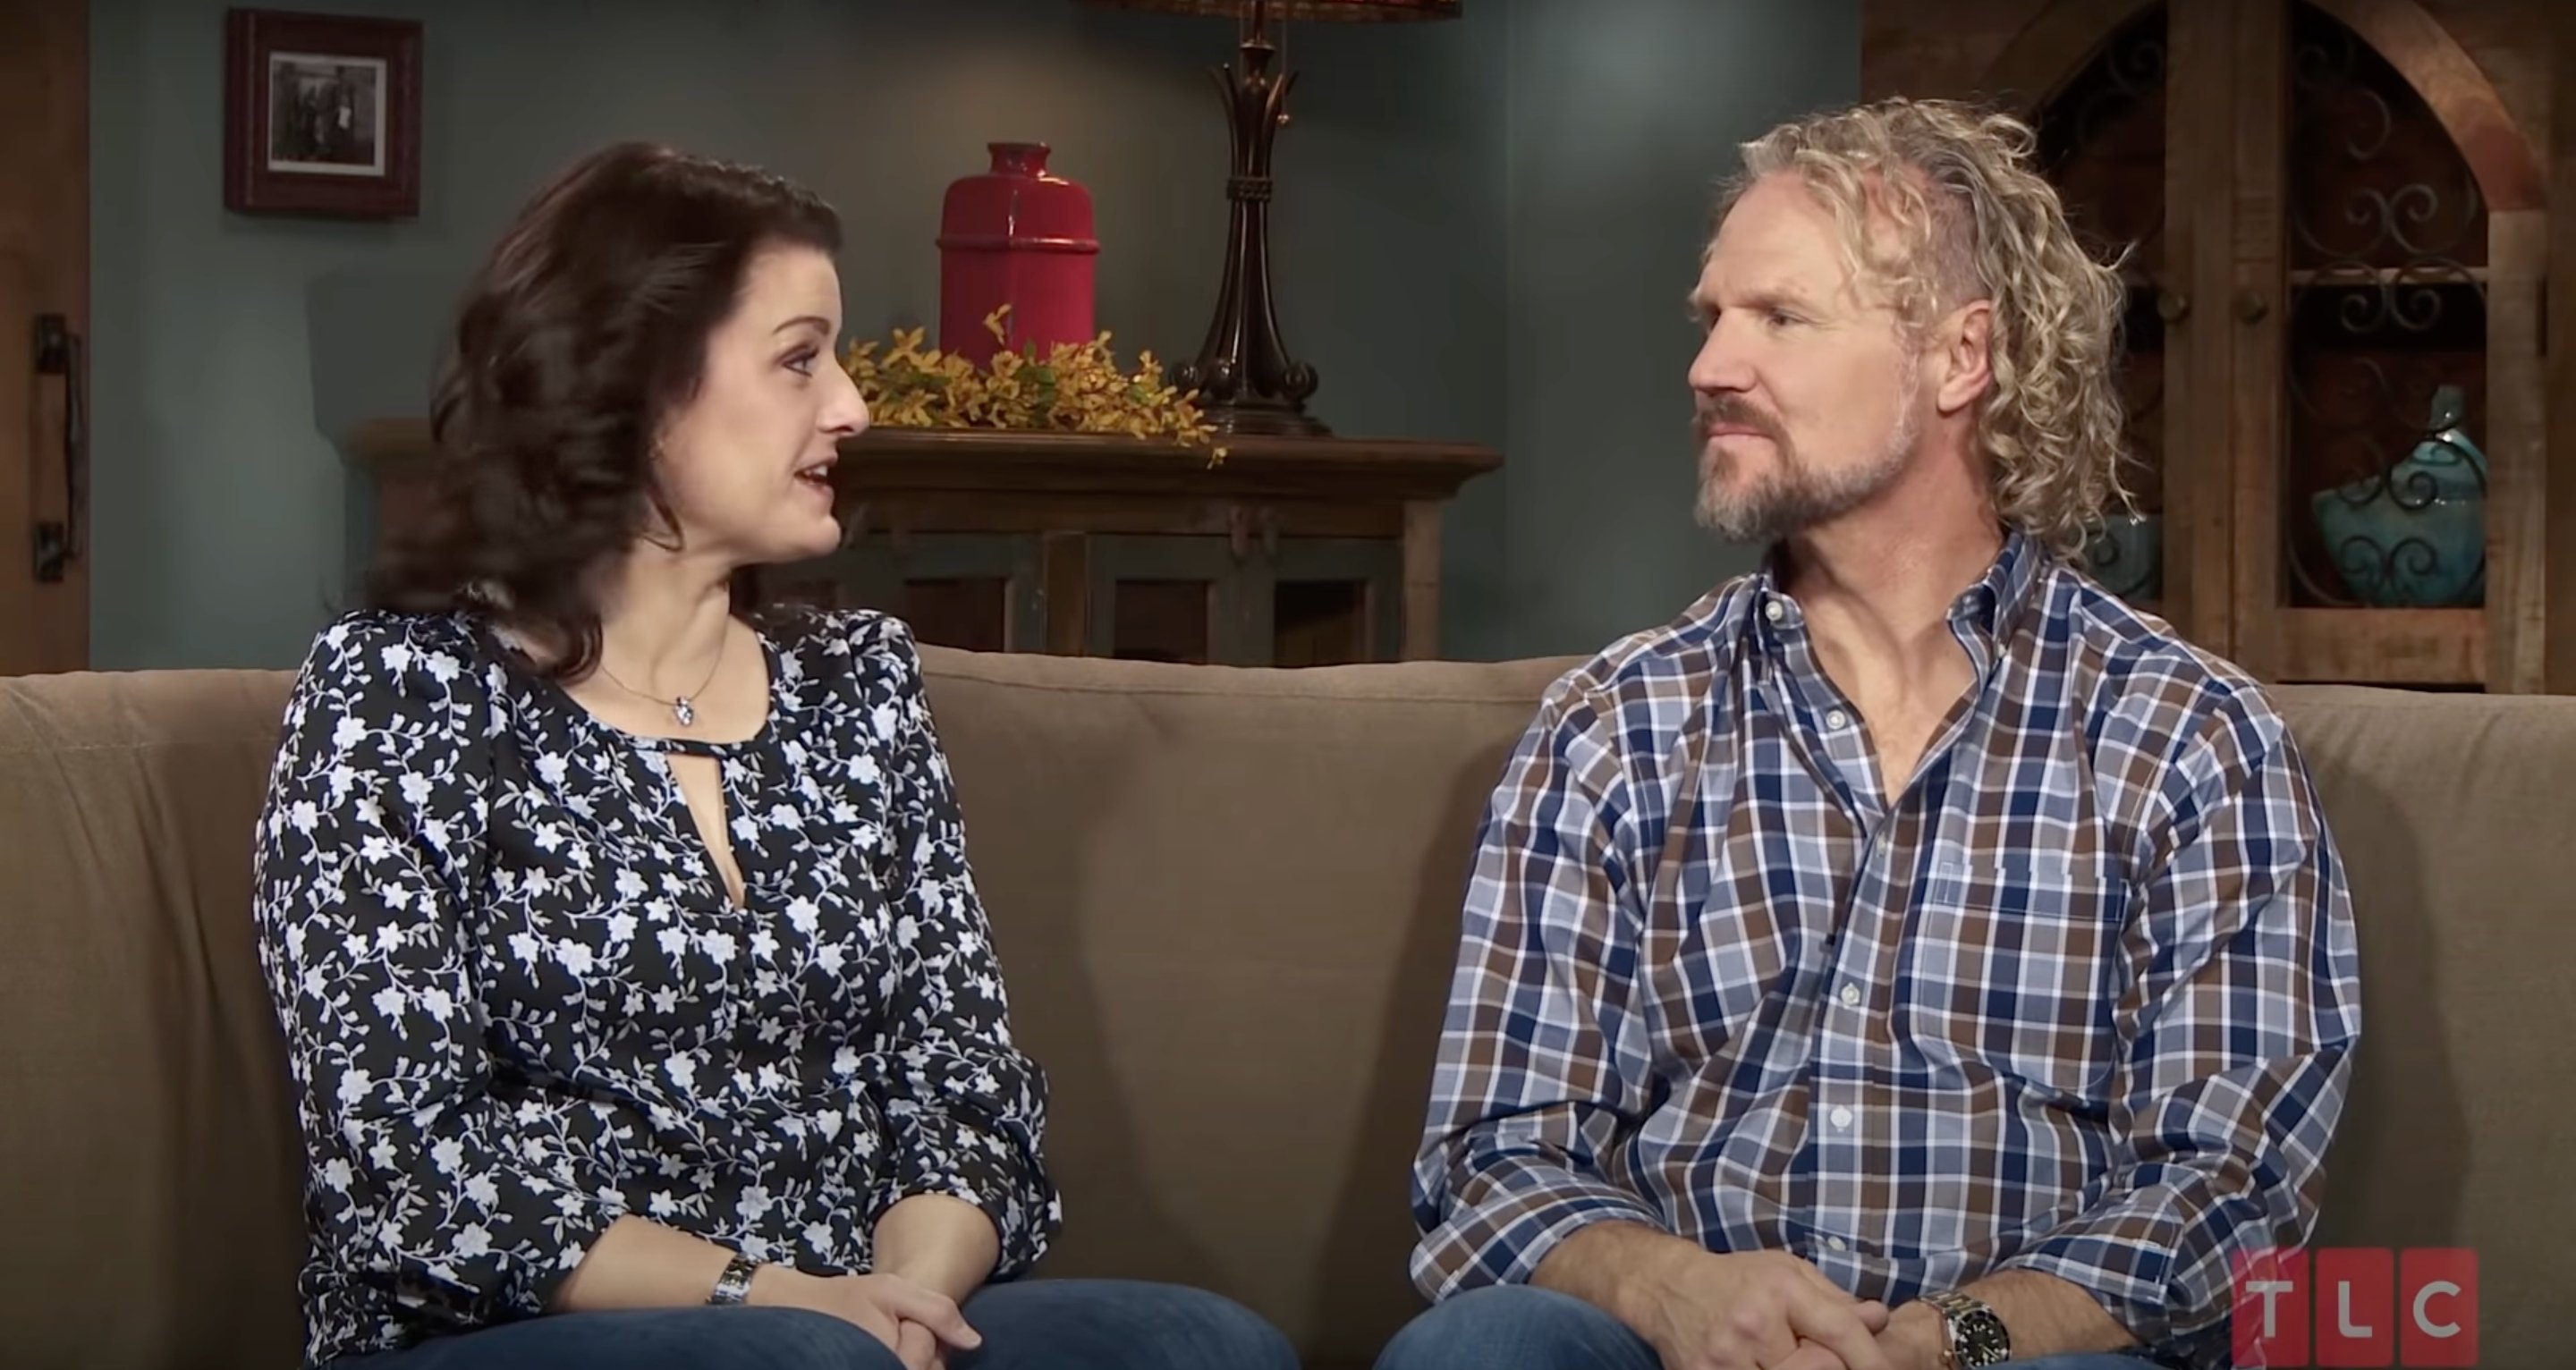 Robyn Brown and Kody Brown sitting together on couch during interview for 'Sister Wives'